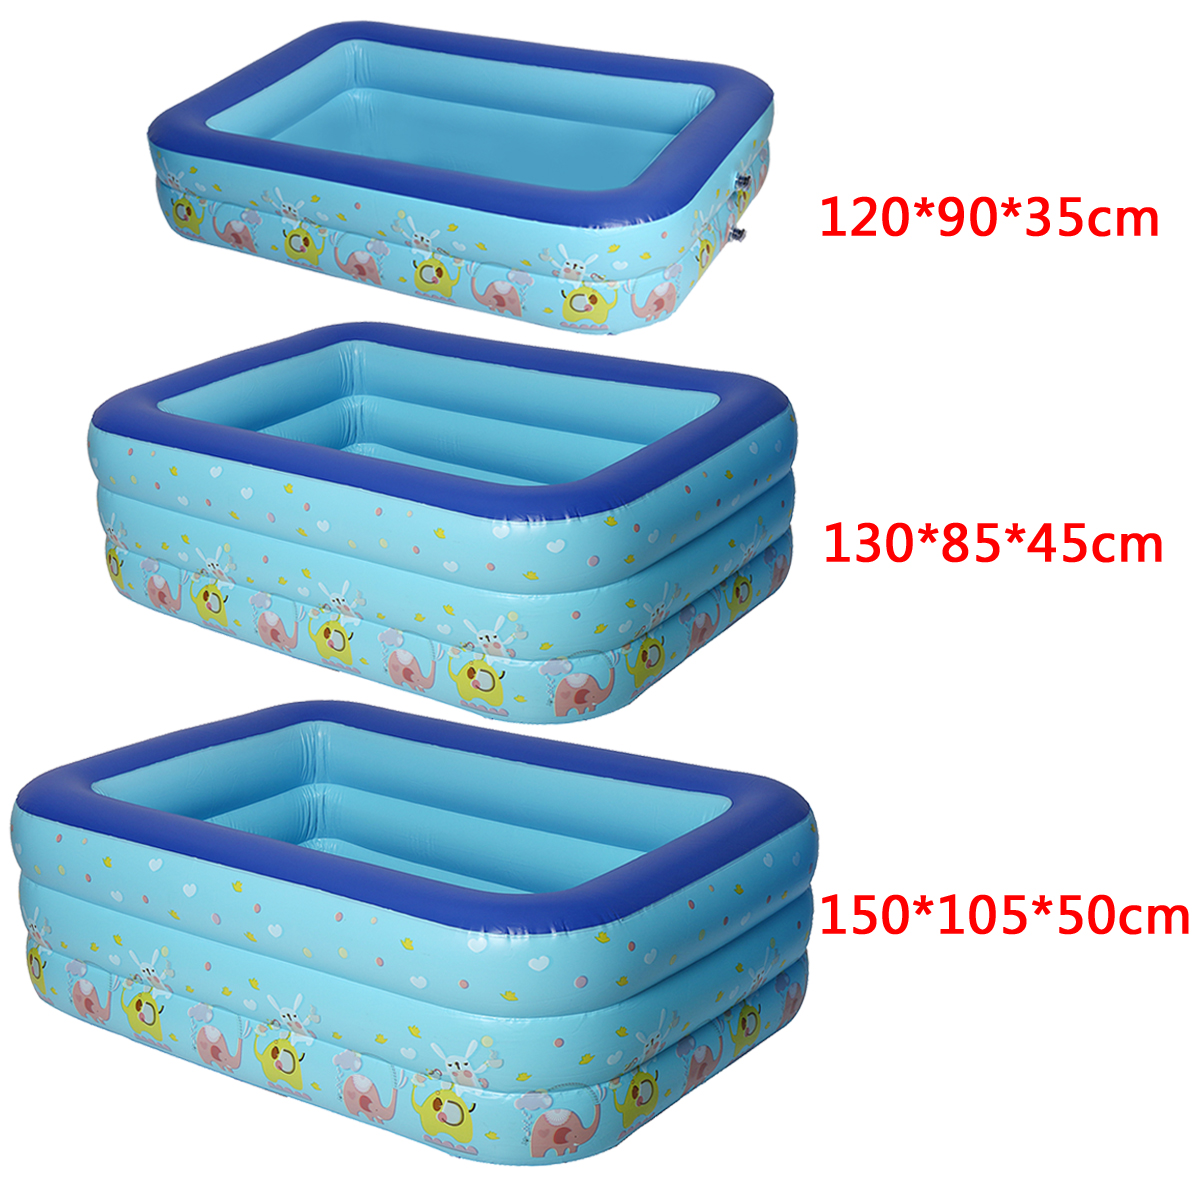 1-4-Persons-Inflatable-Swimming-Pool-Outdoor-Summer-Inflatable-Pool-Air-Pump-for-Children-Adult-1710979-2